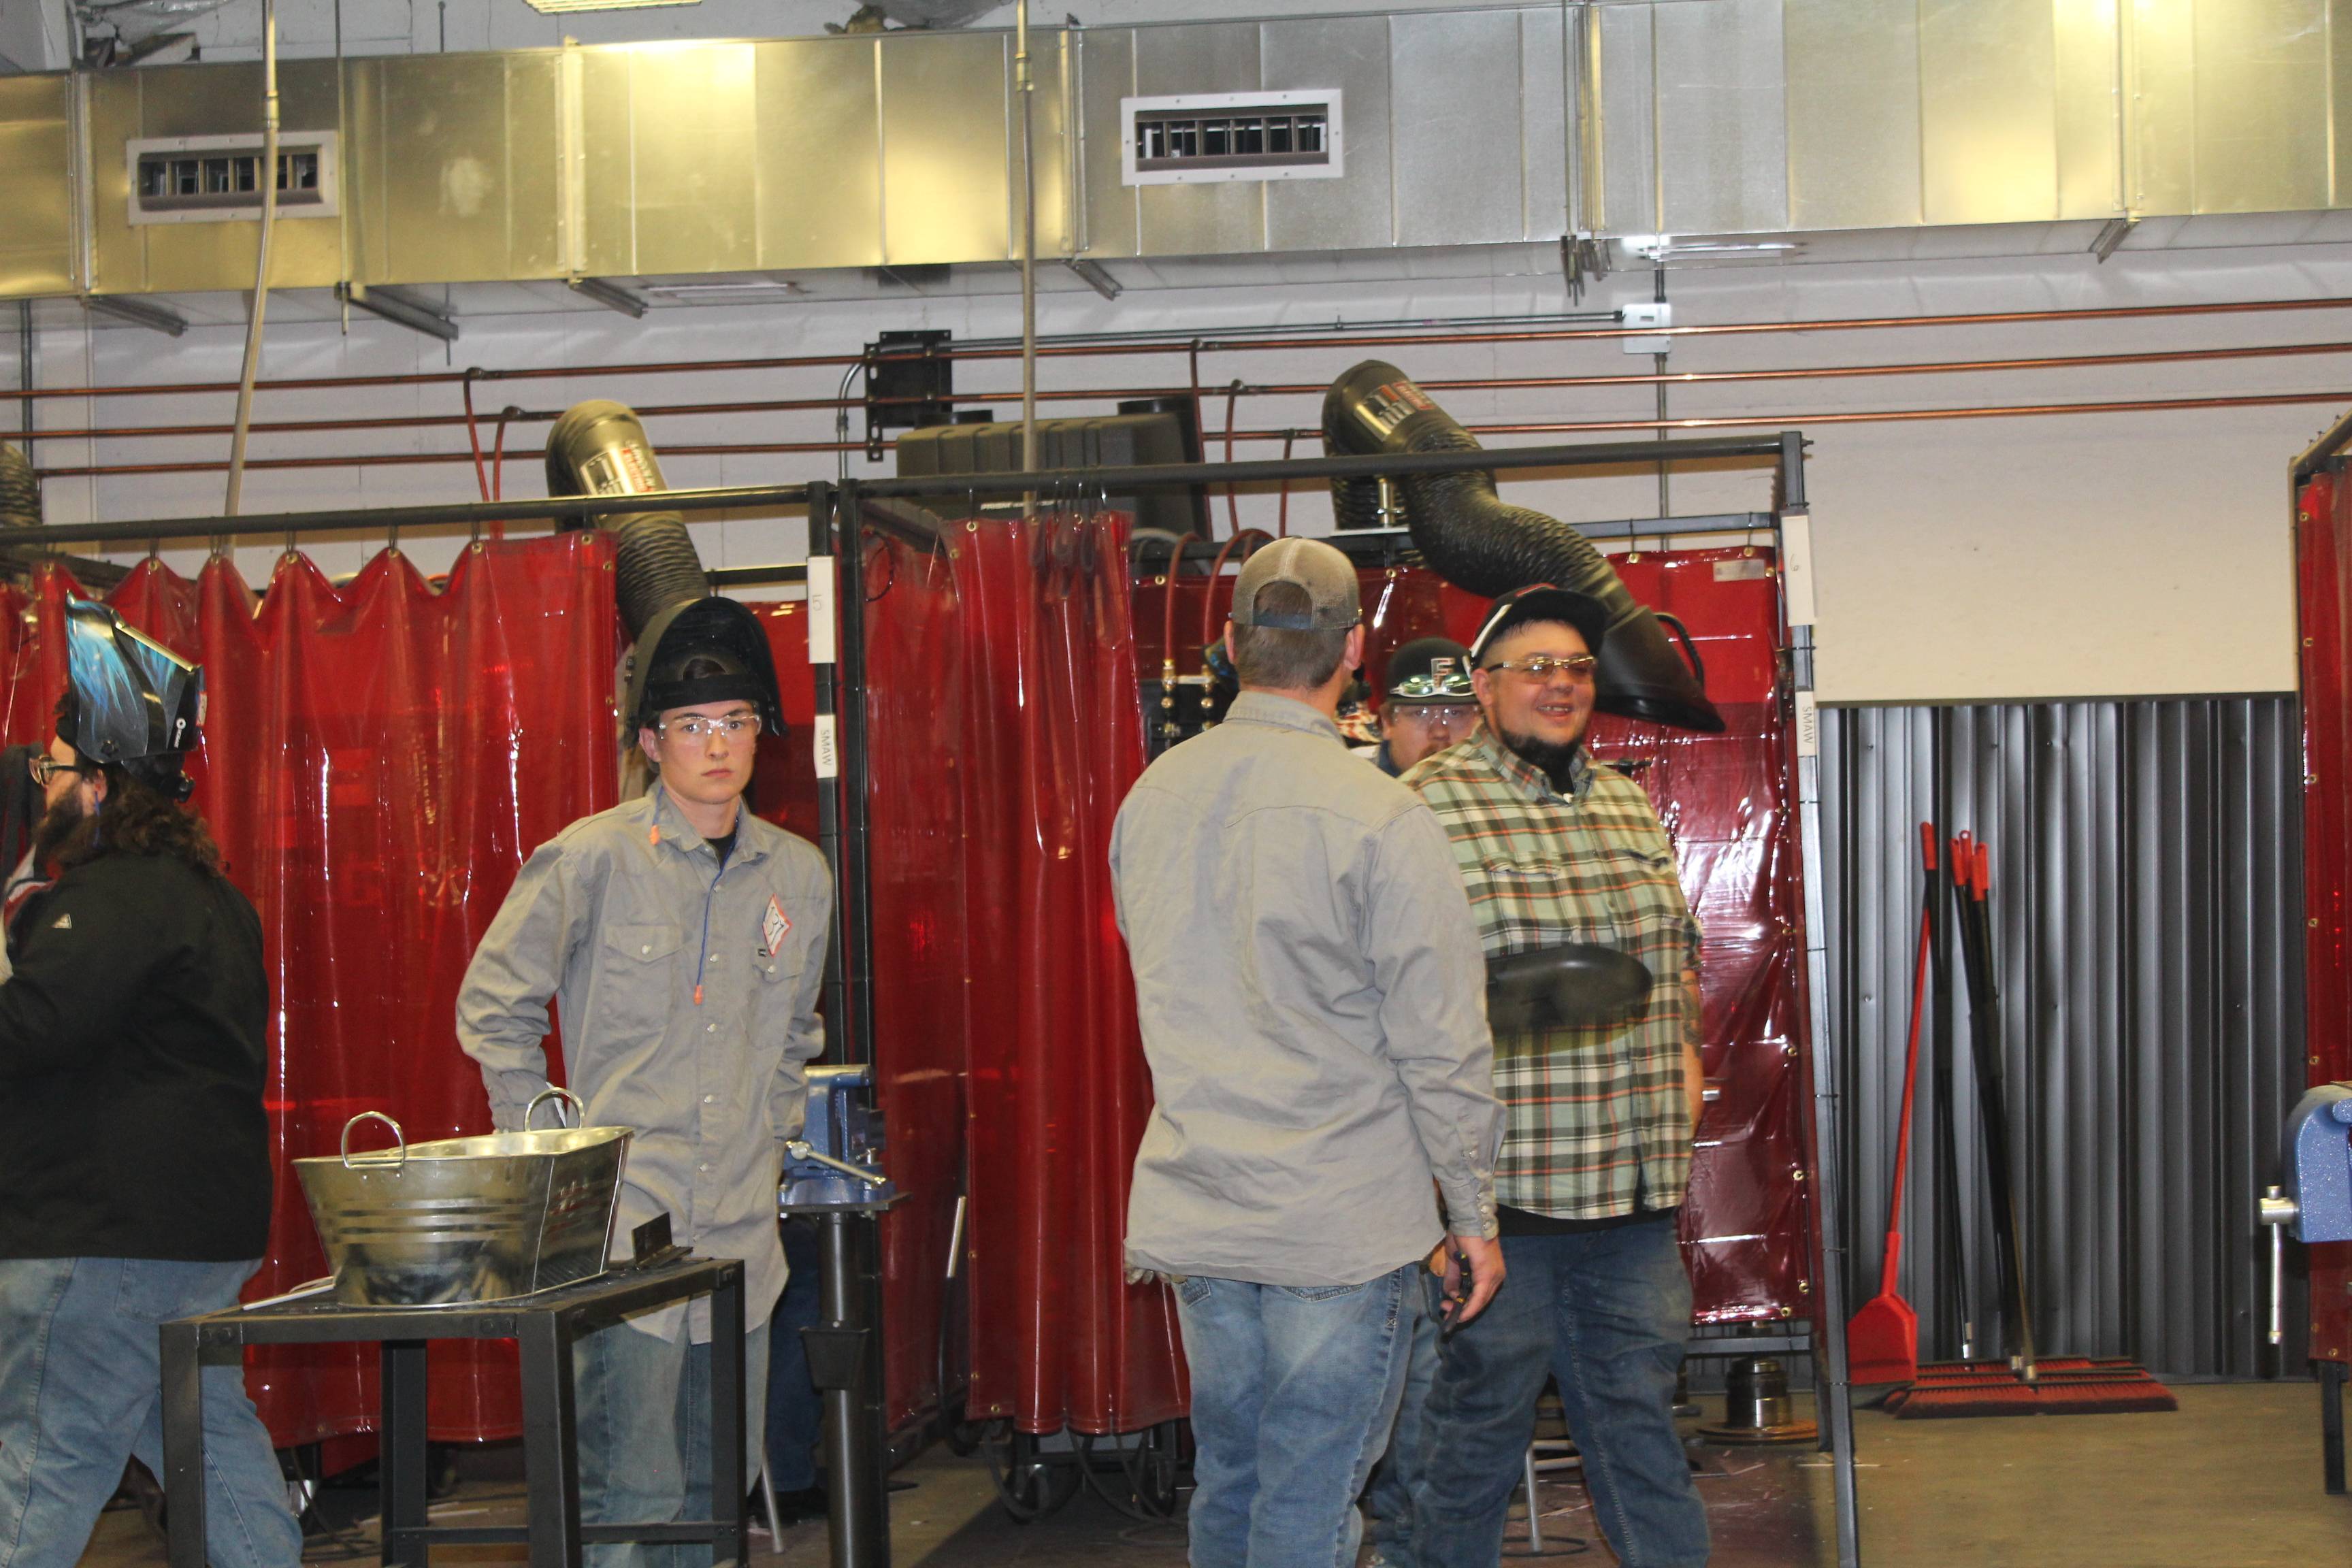 welding lab candid 2022 competition